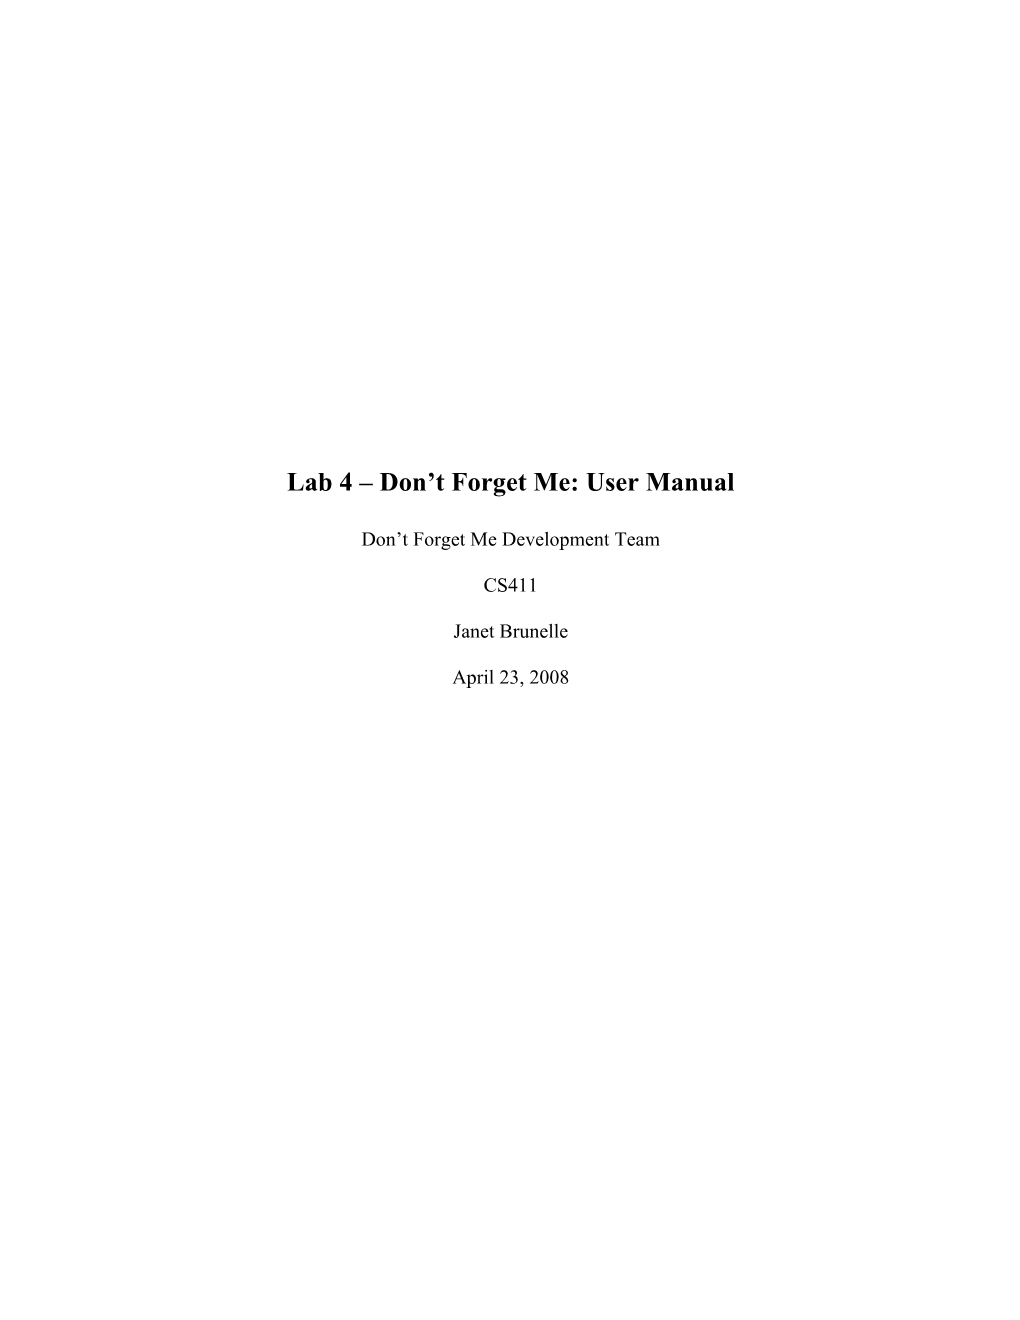 Lab 4 Don T Forget Me: User Manual